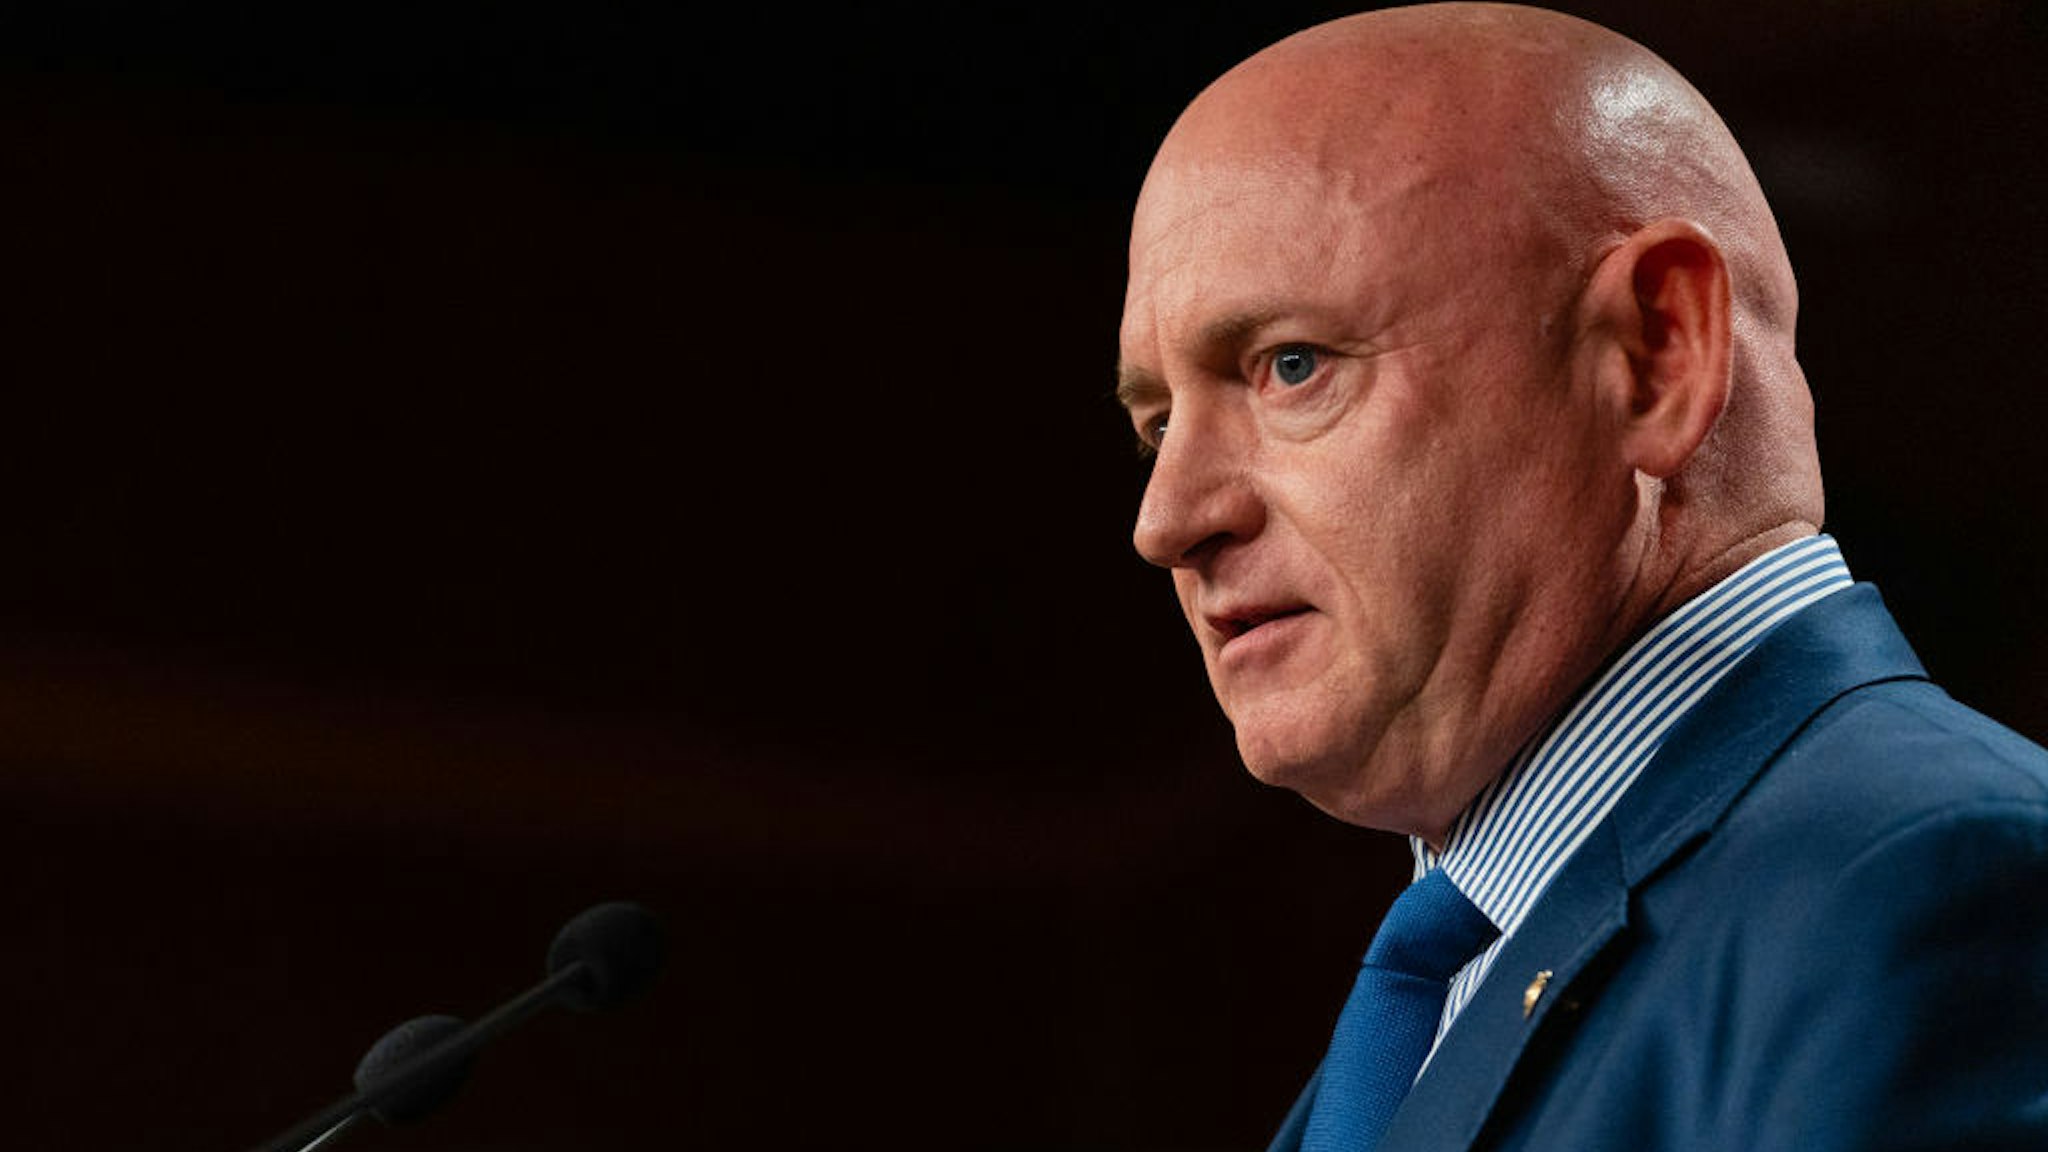 Senator Mark Kelly, a Democrat from Arizona, speaks during a news conference following the weekly Democratic caucus luncheon at the US Capitol in Washington, D.C., US, on Tuesday, July 26, 2022. The Senate delayed a procedural vote on a bill to boost the US domestic semiconductor industry after flight disruptions caused by storms on the East Coast prevented some senators from returning to Washington on Monday. Photographer: Eric Lee/Bloomberg